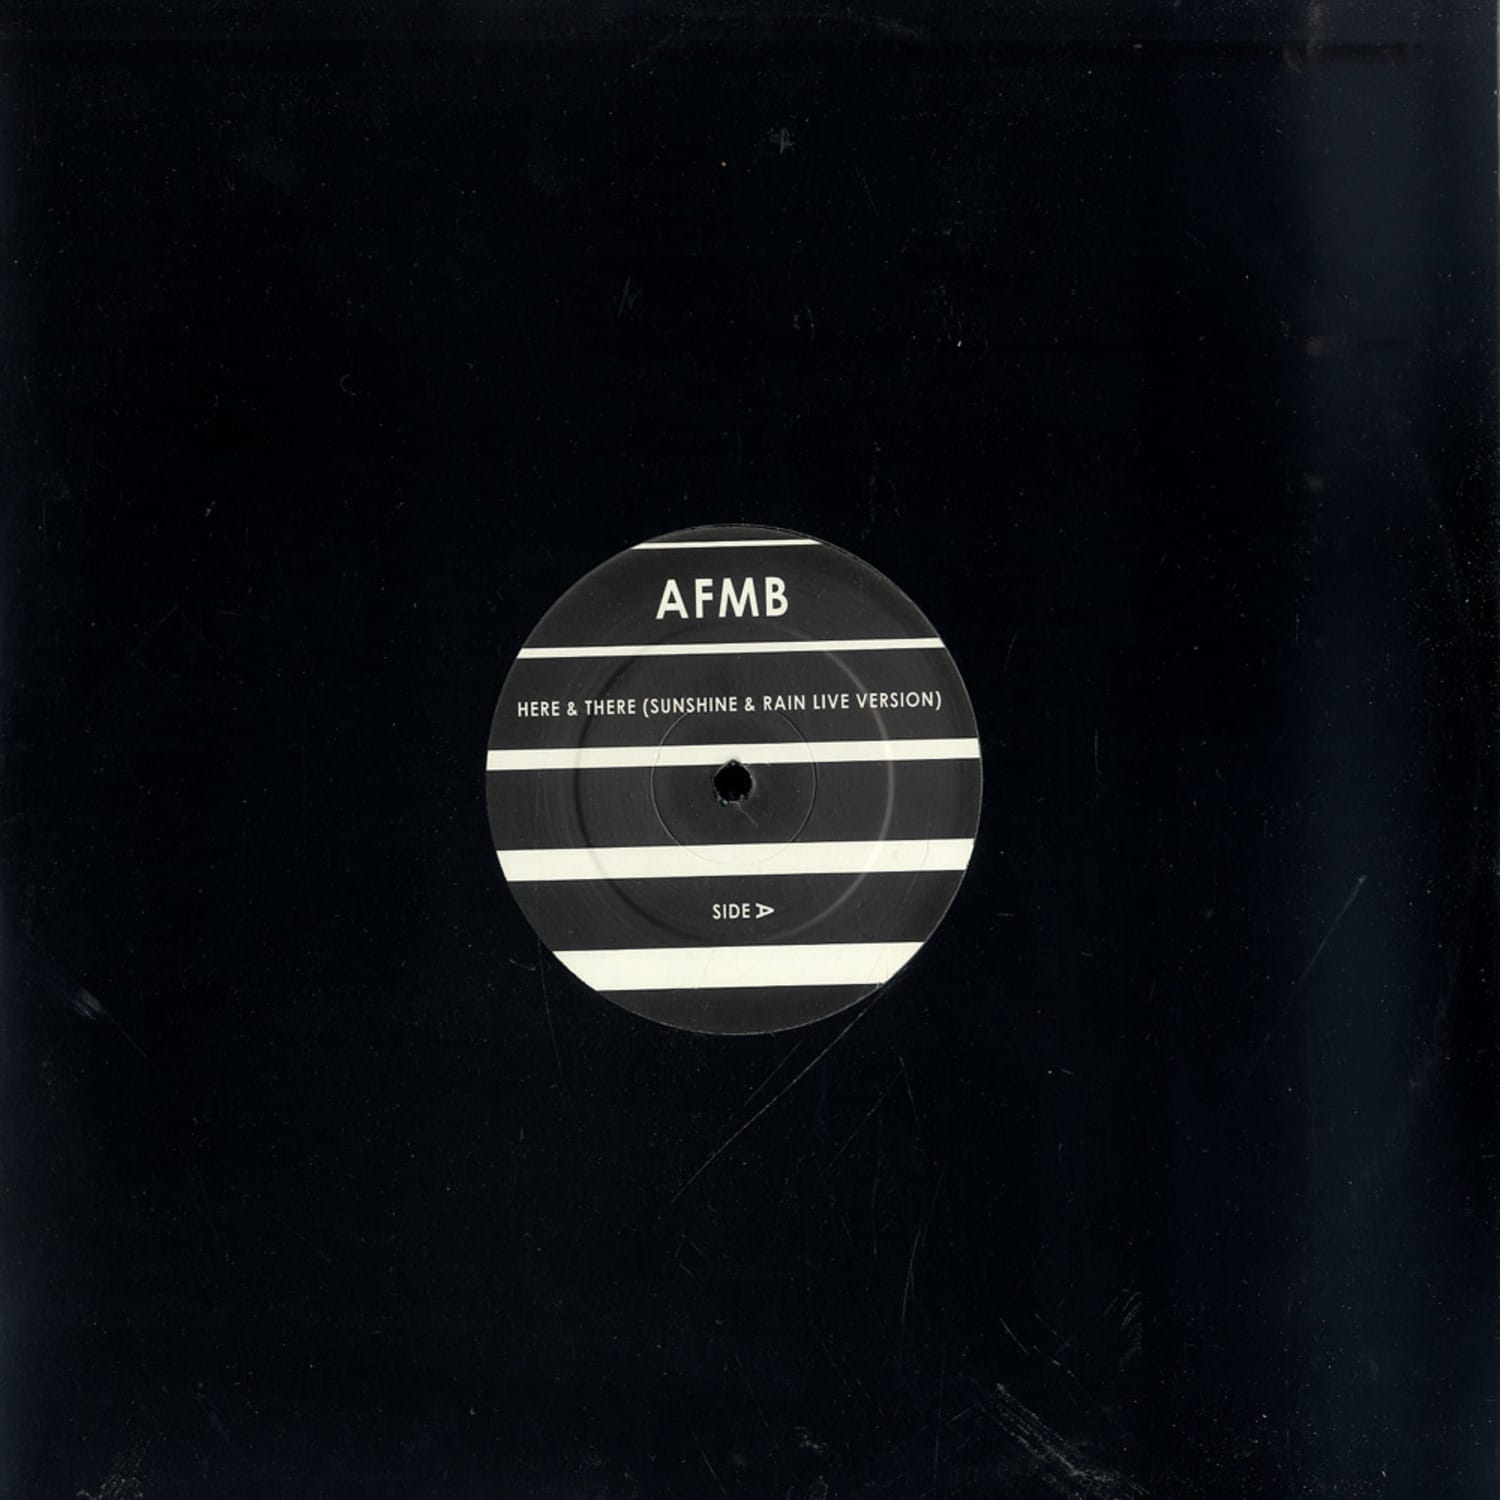 AFMB - HERE & THERE